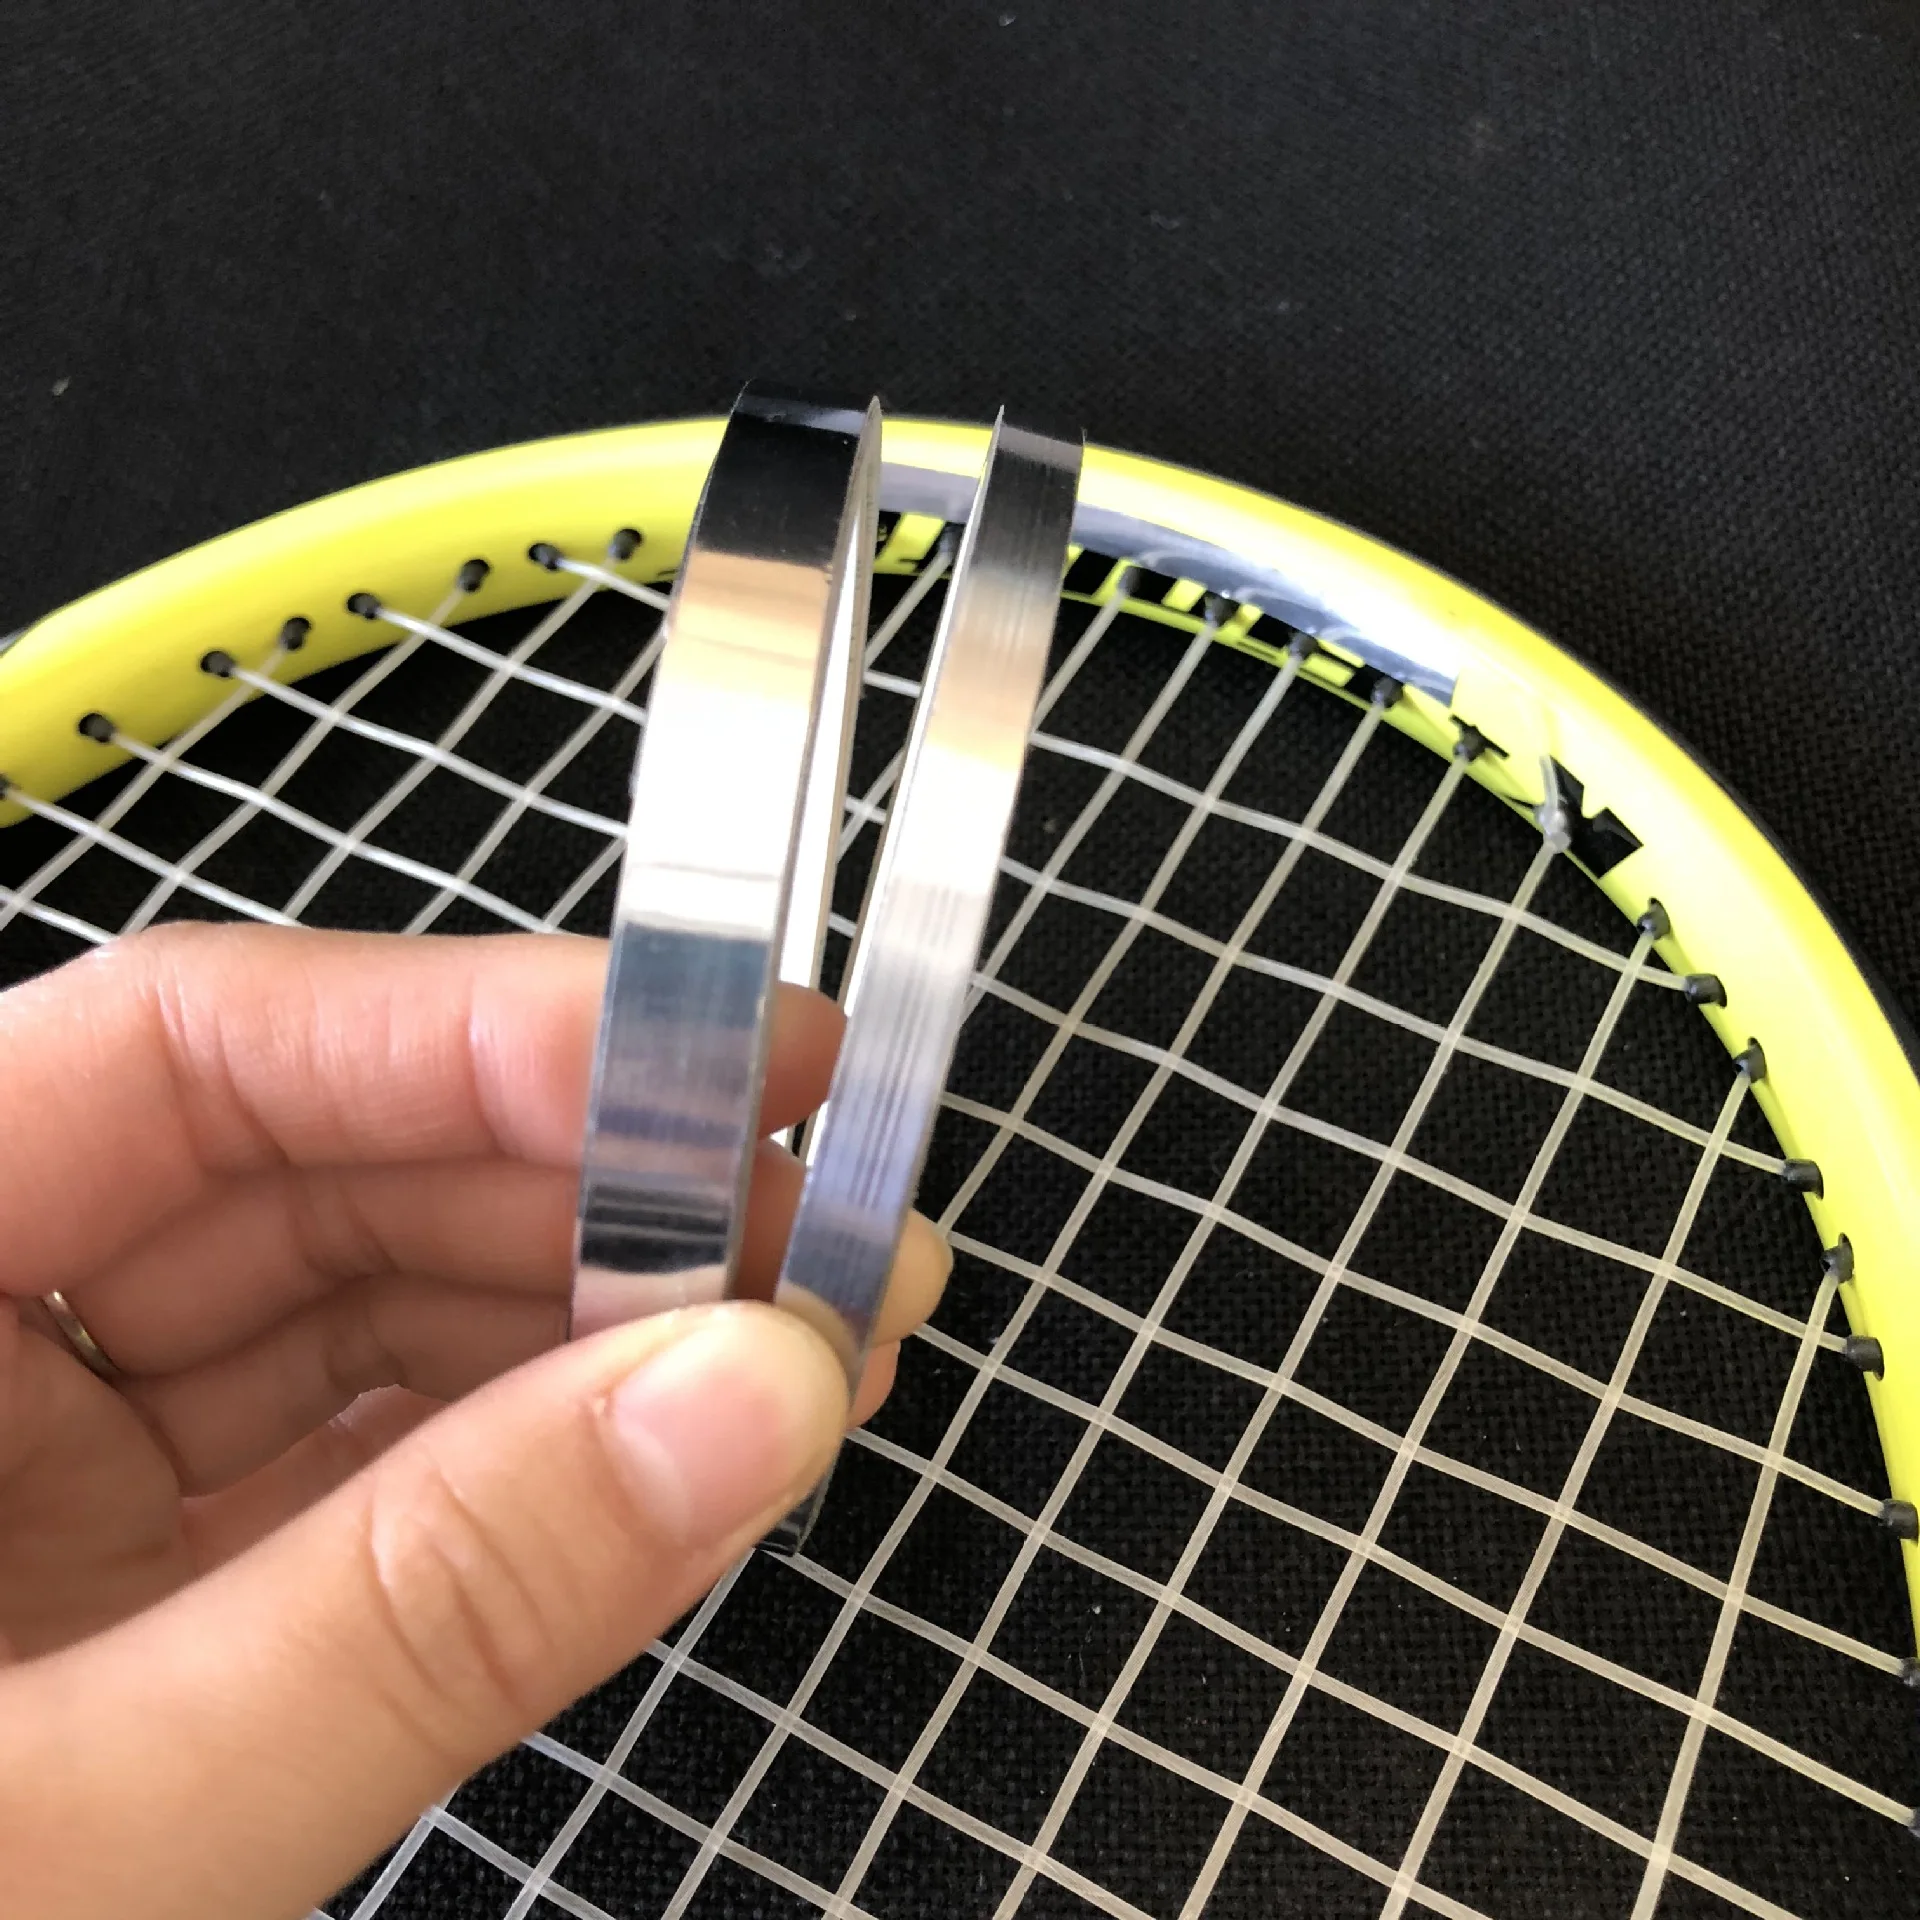 For Golf Club / Tennis Racket High Quality Lead Tape With Consistent Thickness And 3m Backing Double Weight Tape - Buy Lead Tape,Golf,Weight Product on